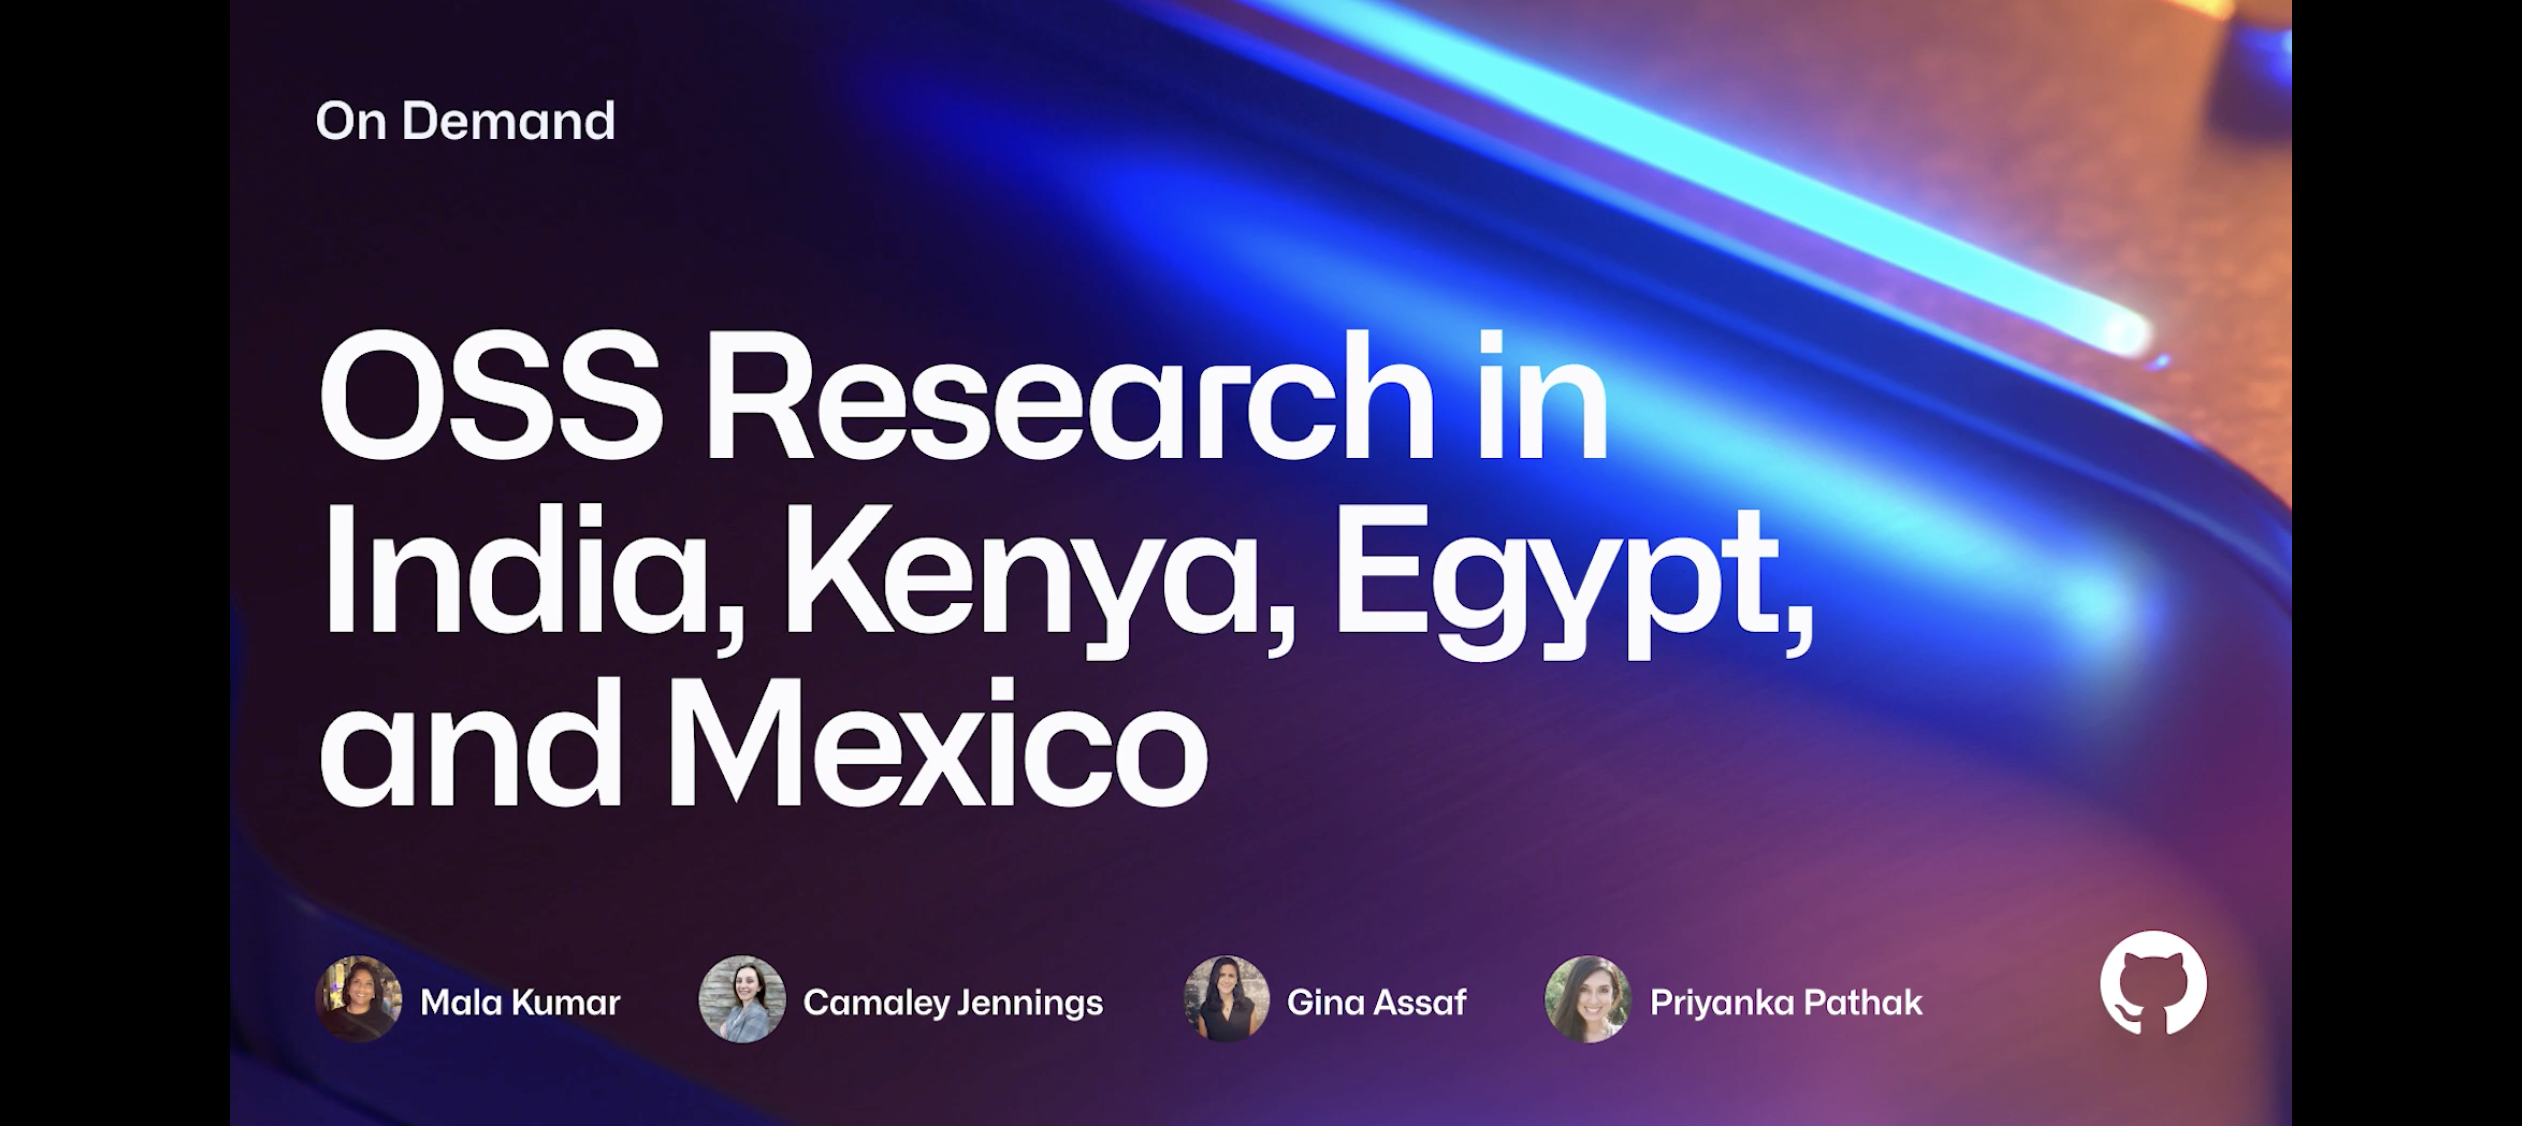 OSS Research in India, Kenya, Egypt, and Mexico